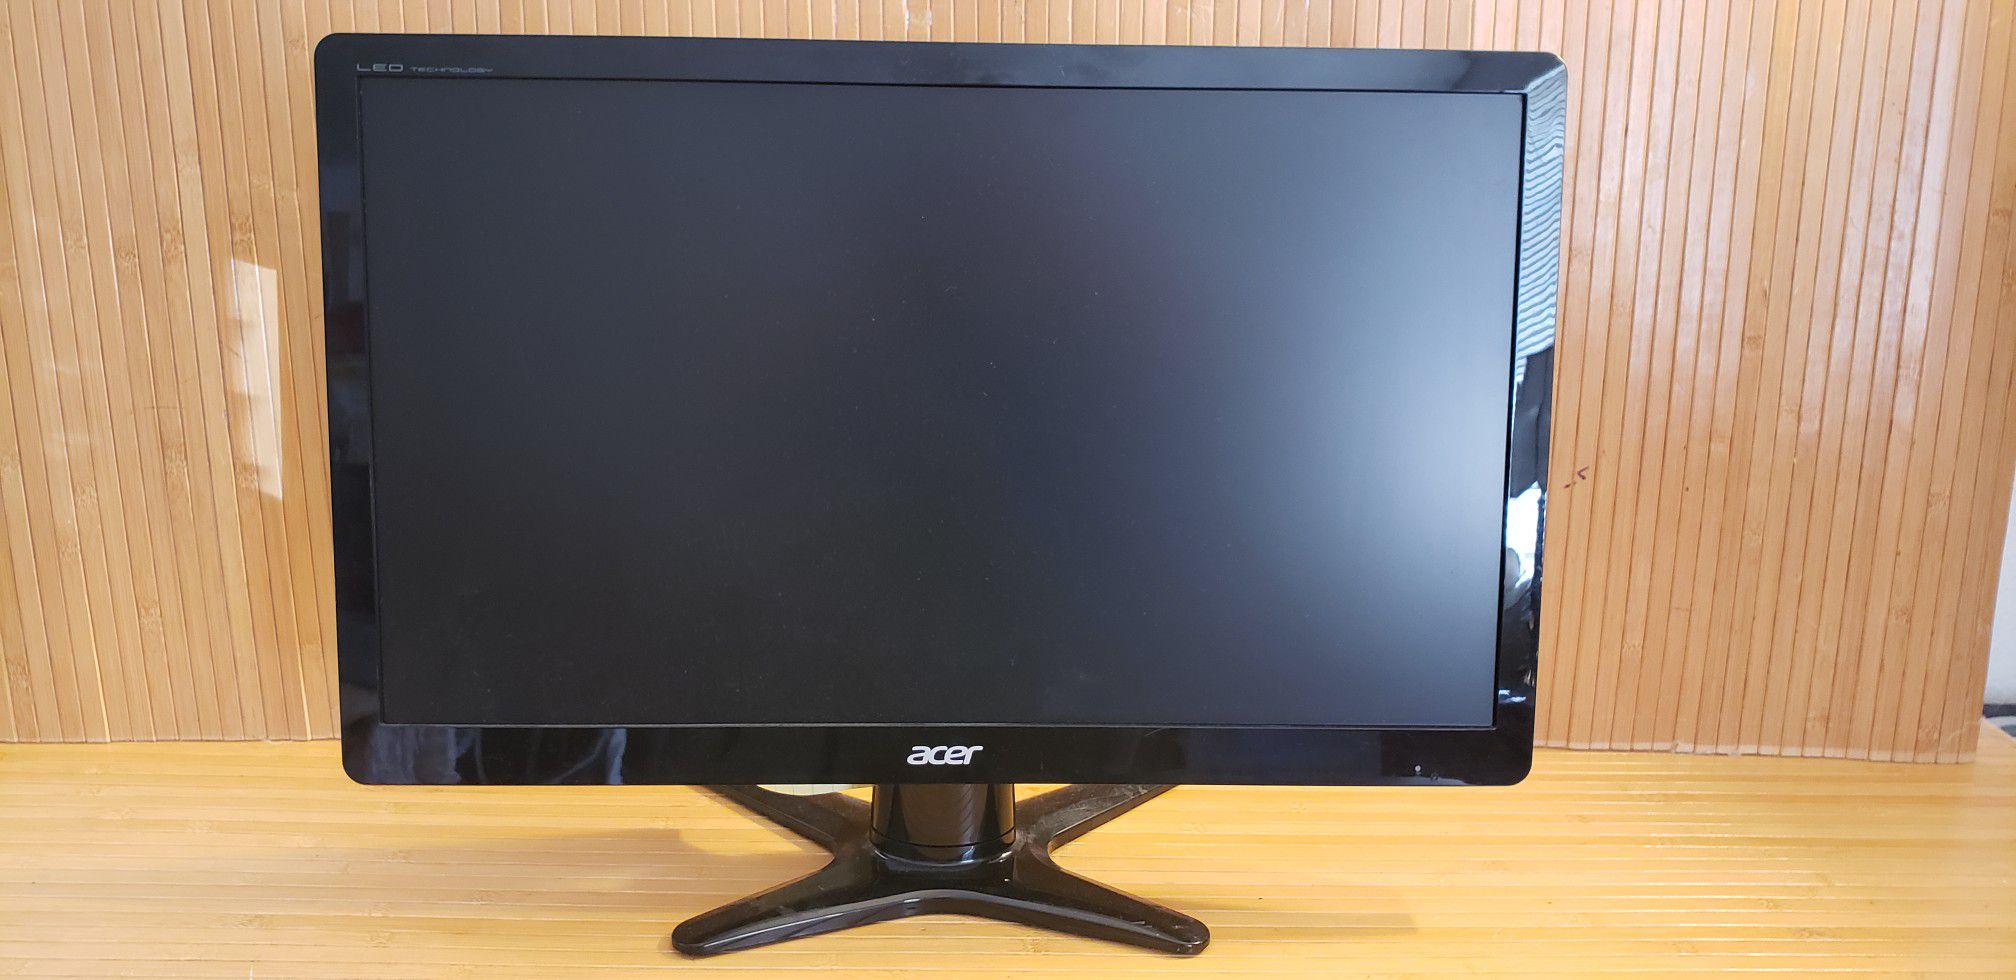 Acer 20" monitor